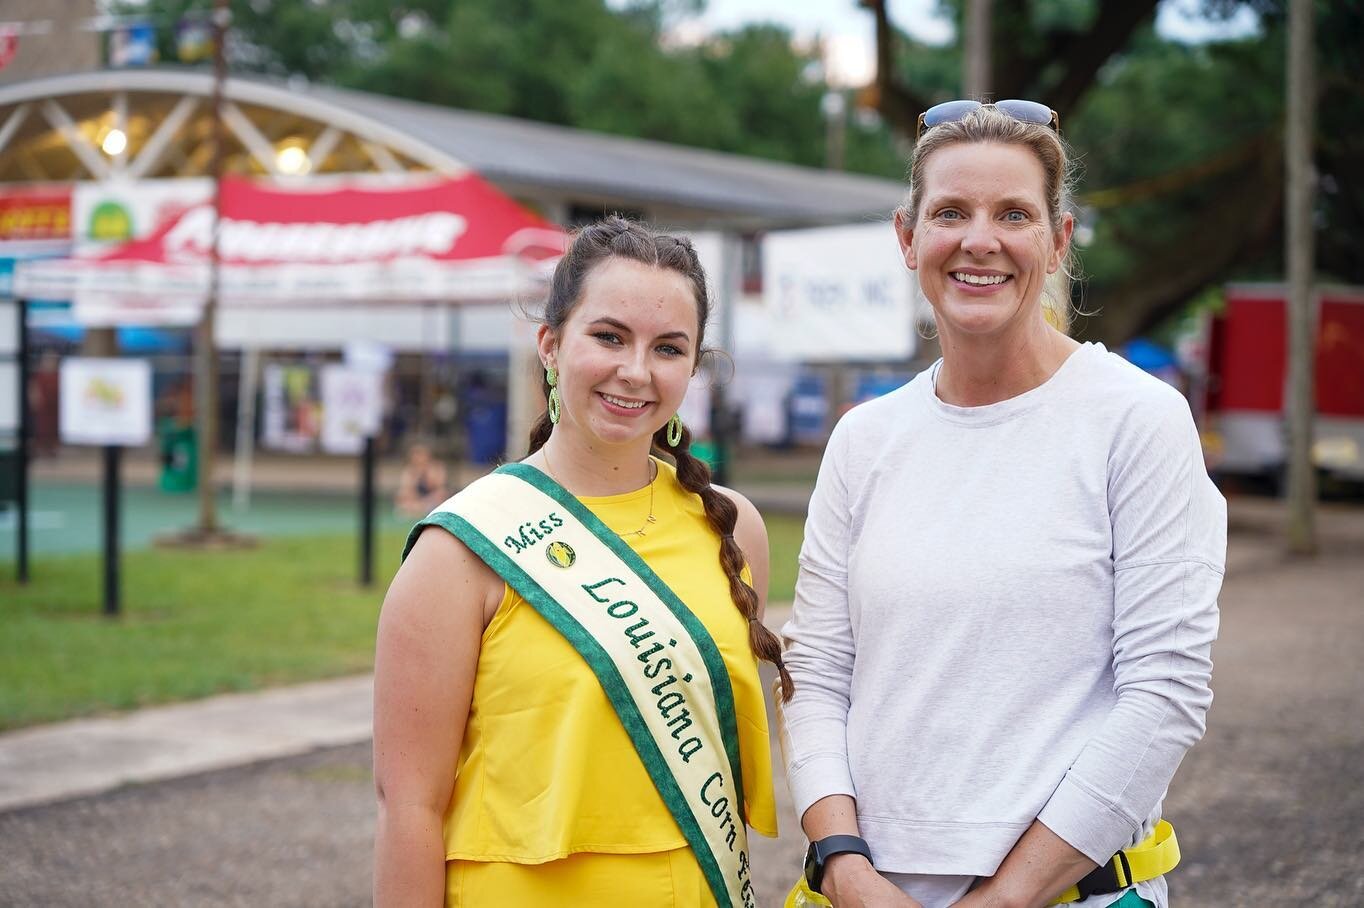 Come out and meet our Queens and Niblets! Miss Louisiana Corn Festival, Heidi Gauthier and her court will be on the festival grounds all weekend. Say hi and take a selfie with our royalty 👸🏽 🌽